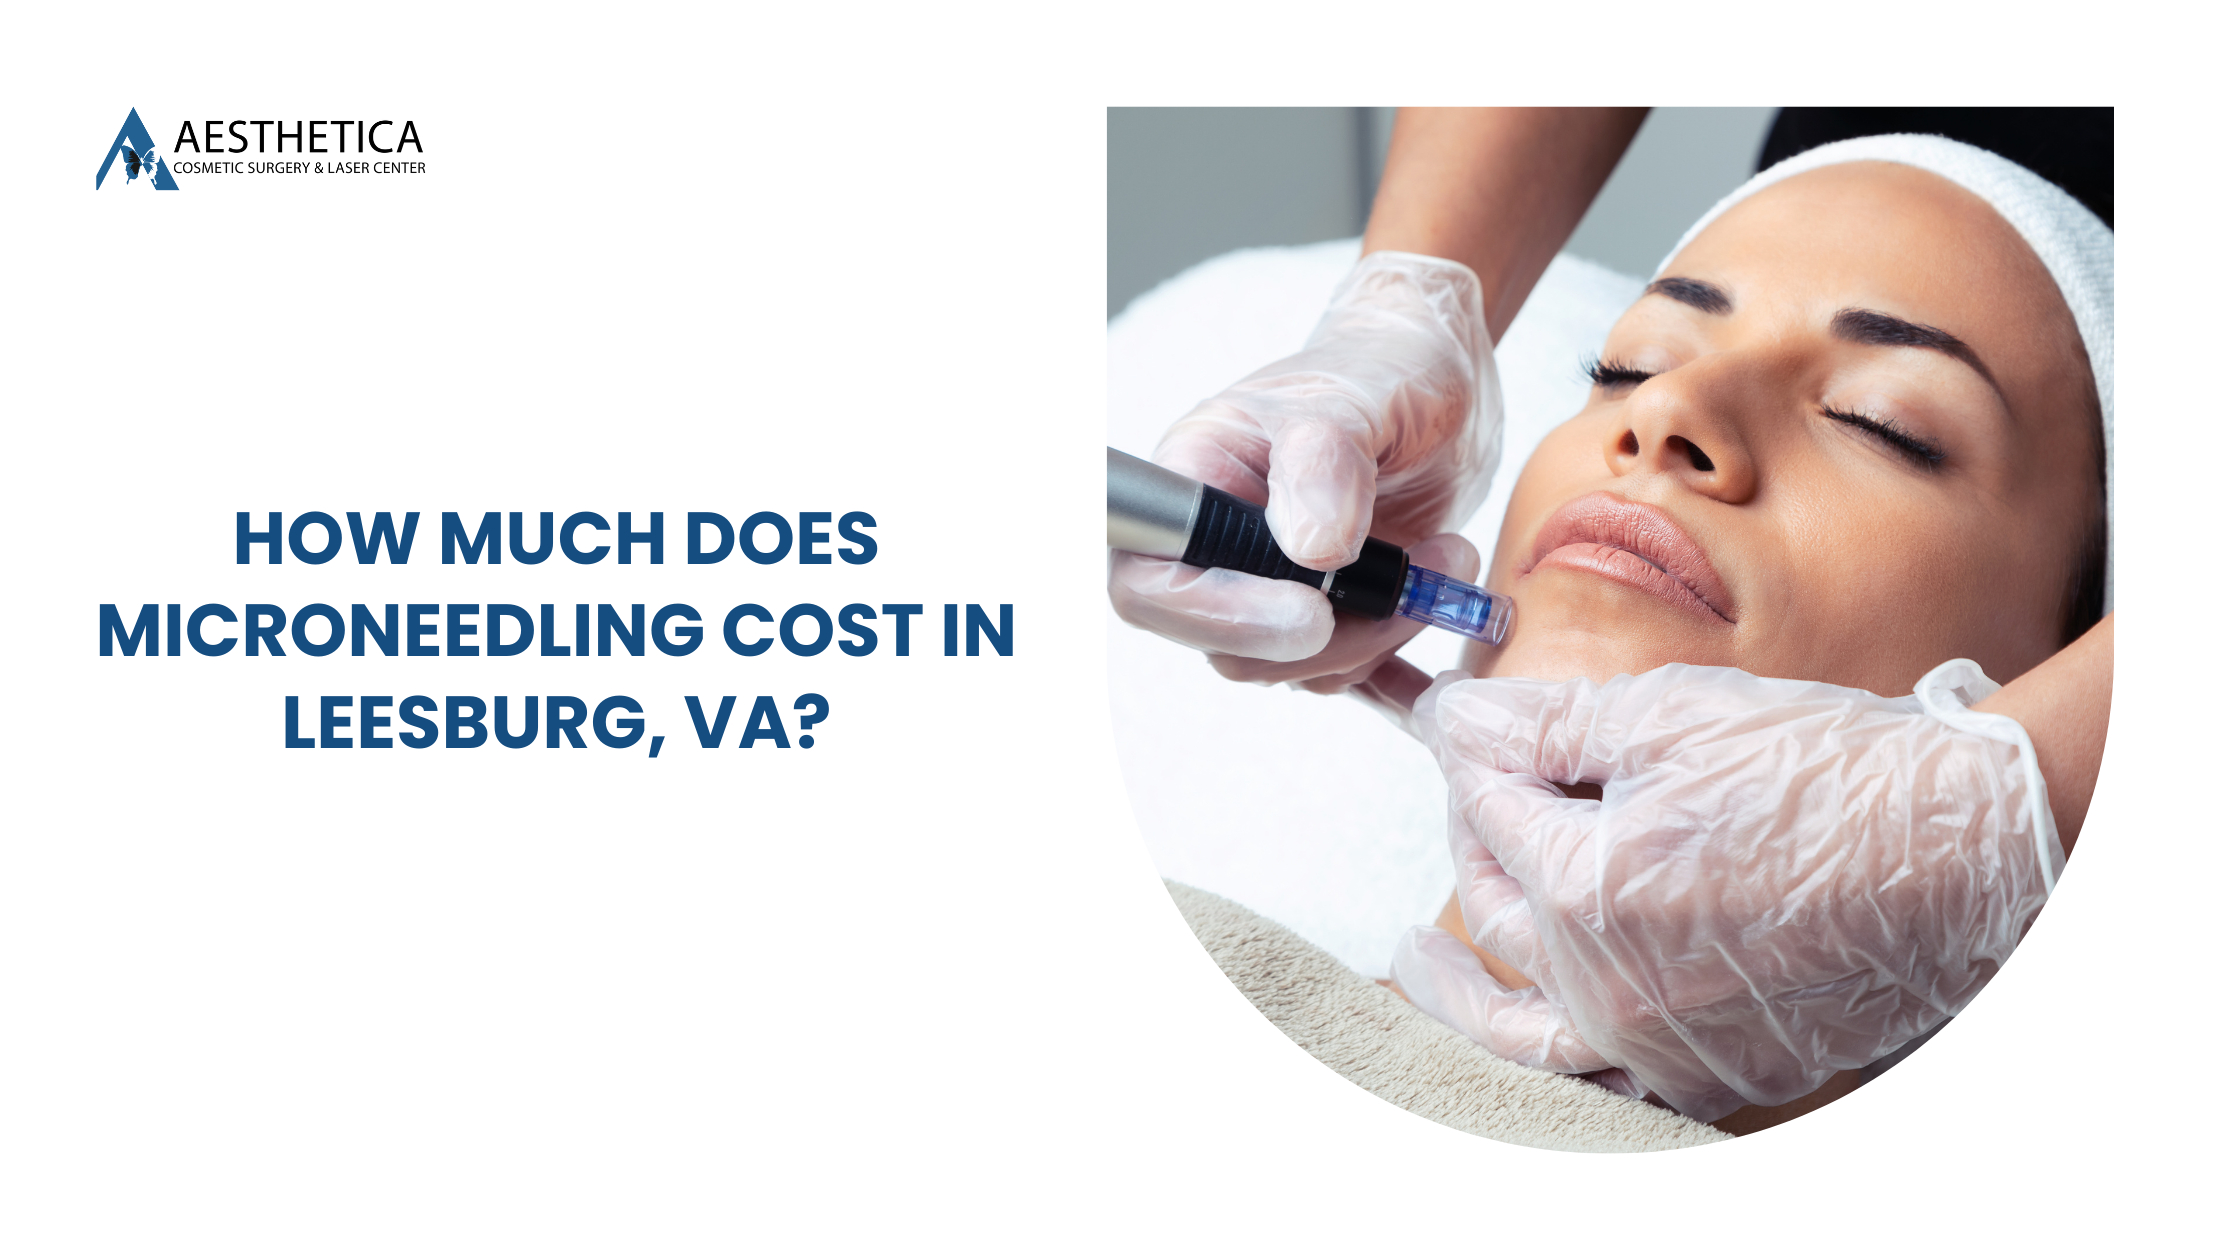 How Much Does Microneedling Cost in Leesburg, VA?